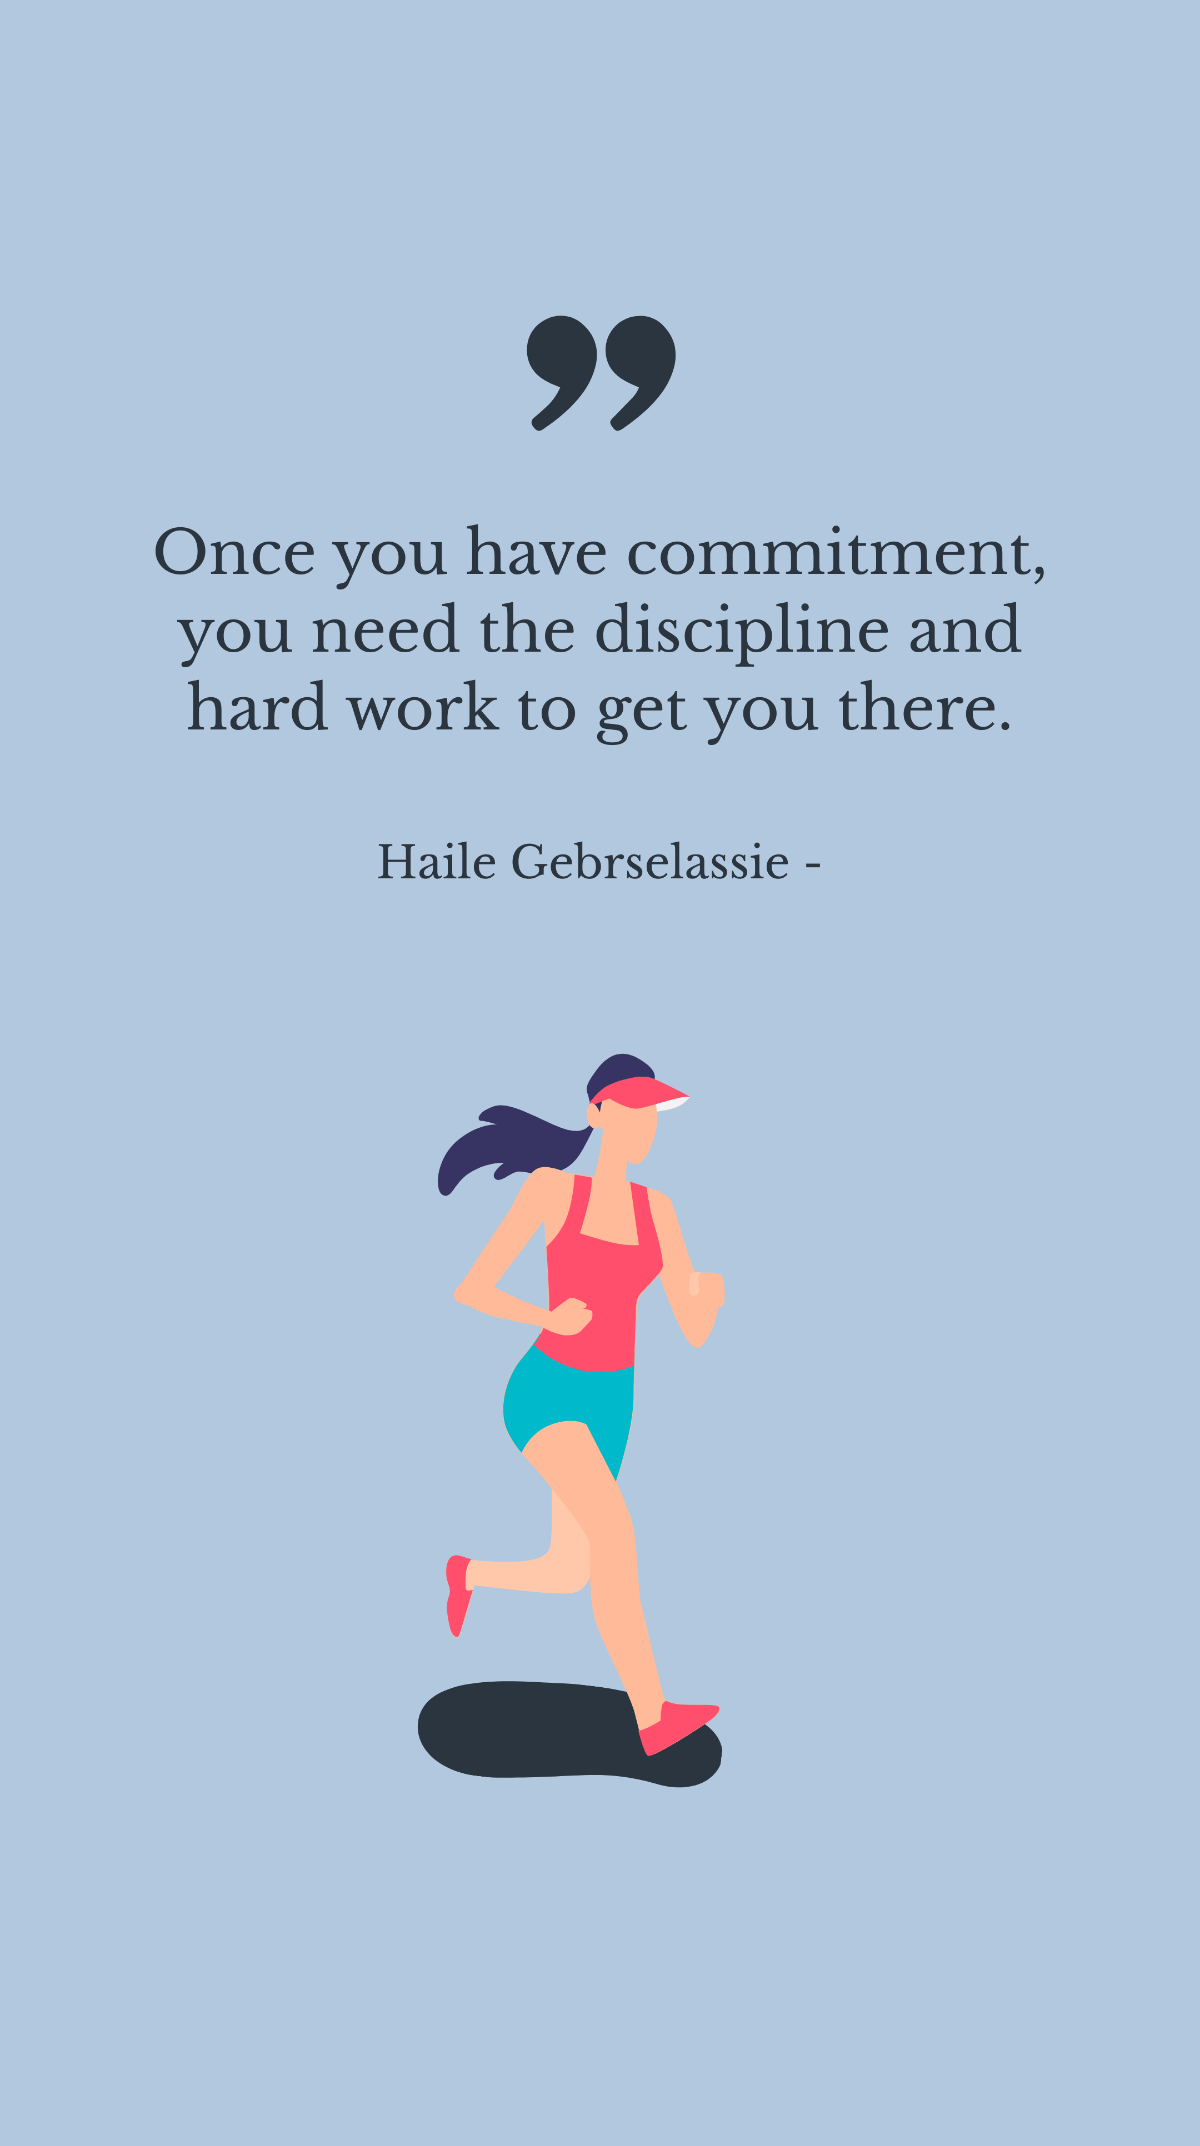 Free Haile Gebrselassie - Once you have commitment, you need the discipline and hard work to get you there. Template